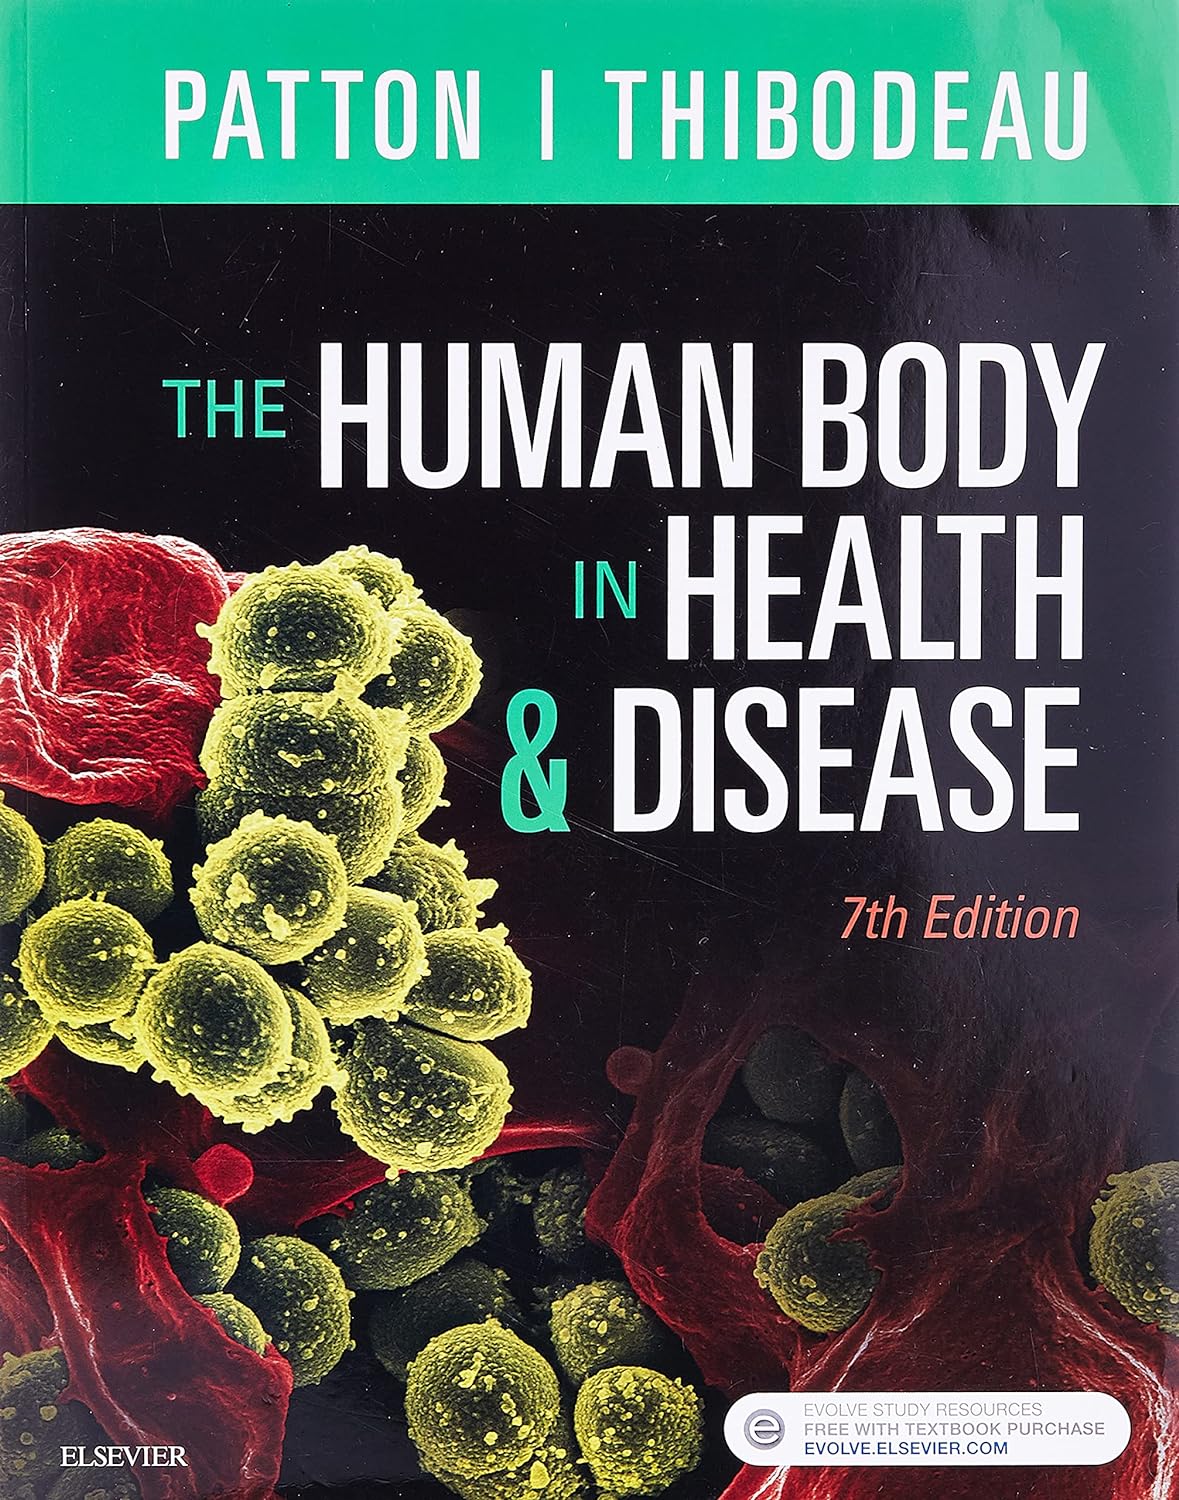 The-Human-Body-in-Health-Disease-7th-Edition-with-Study-guide-1.jpg